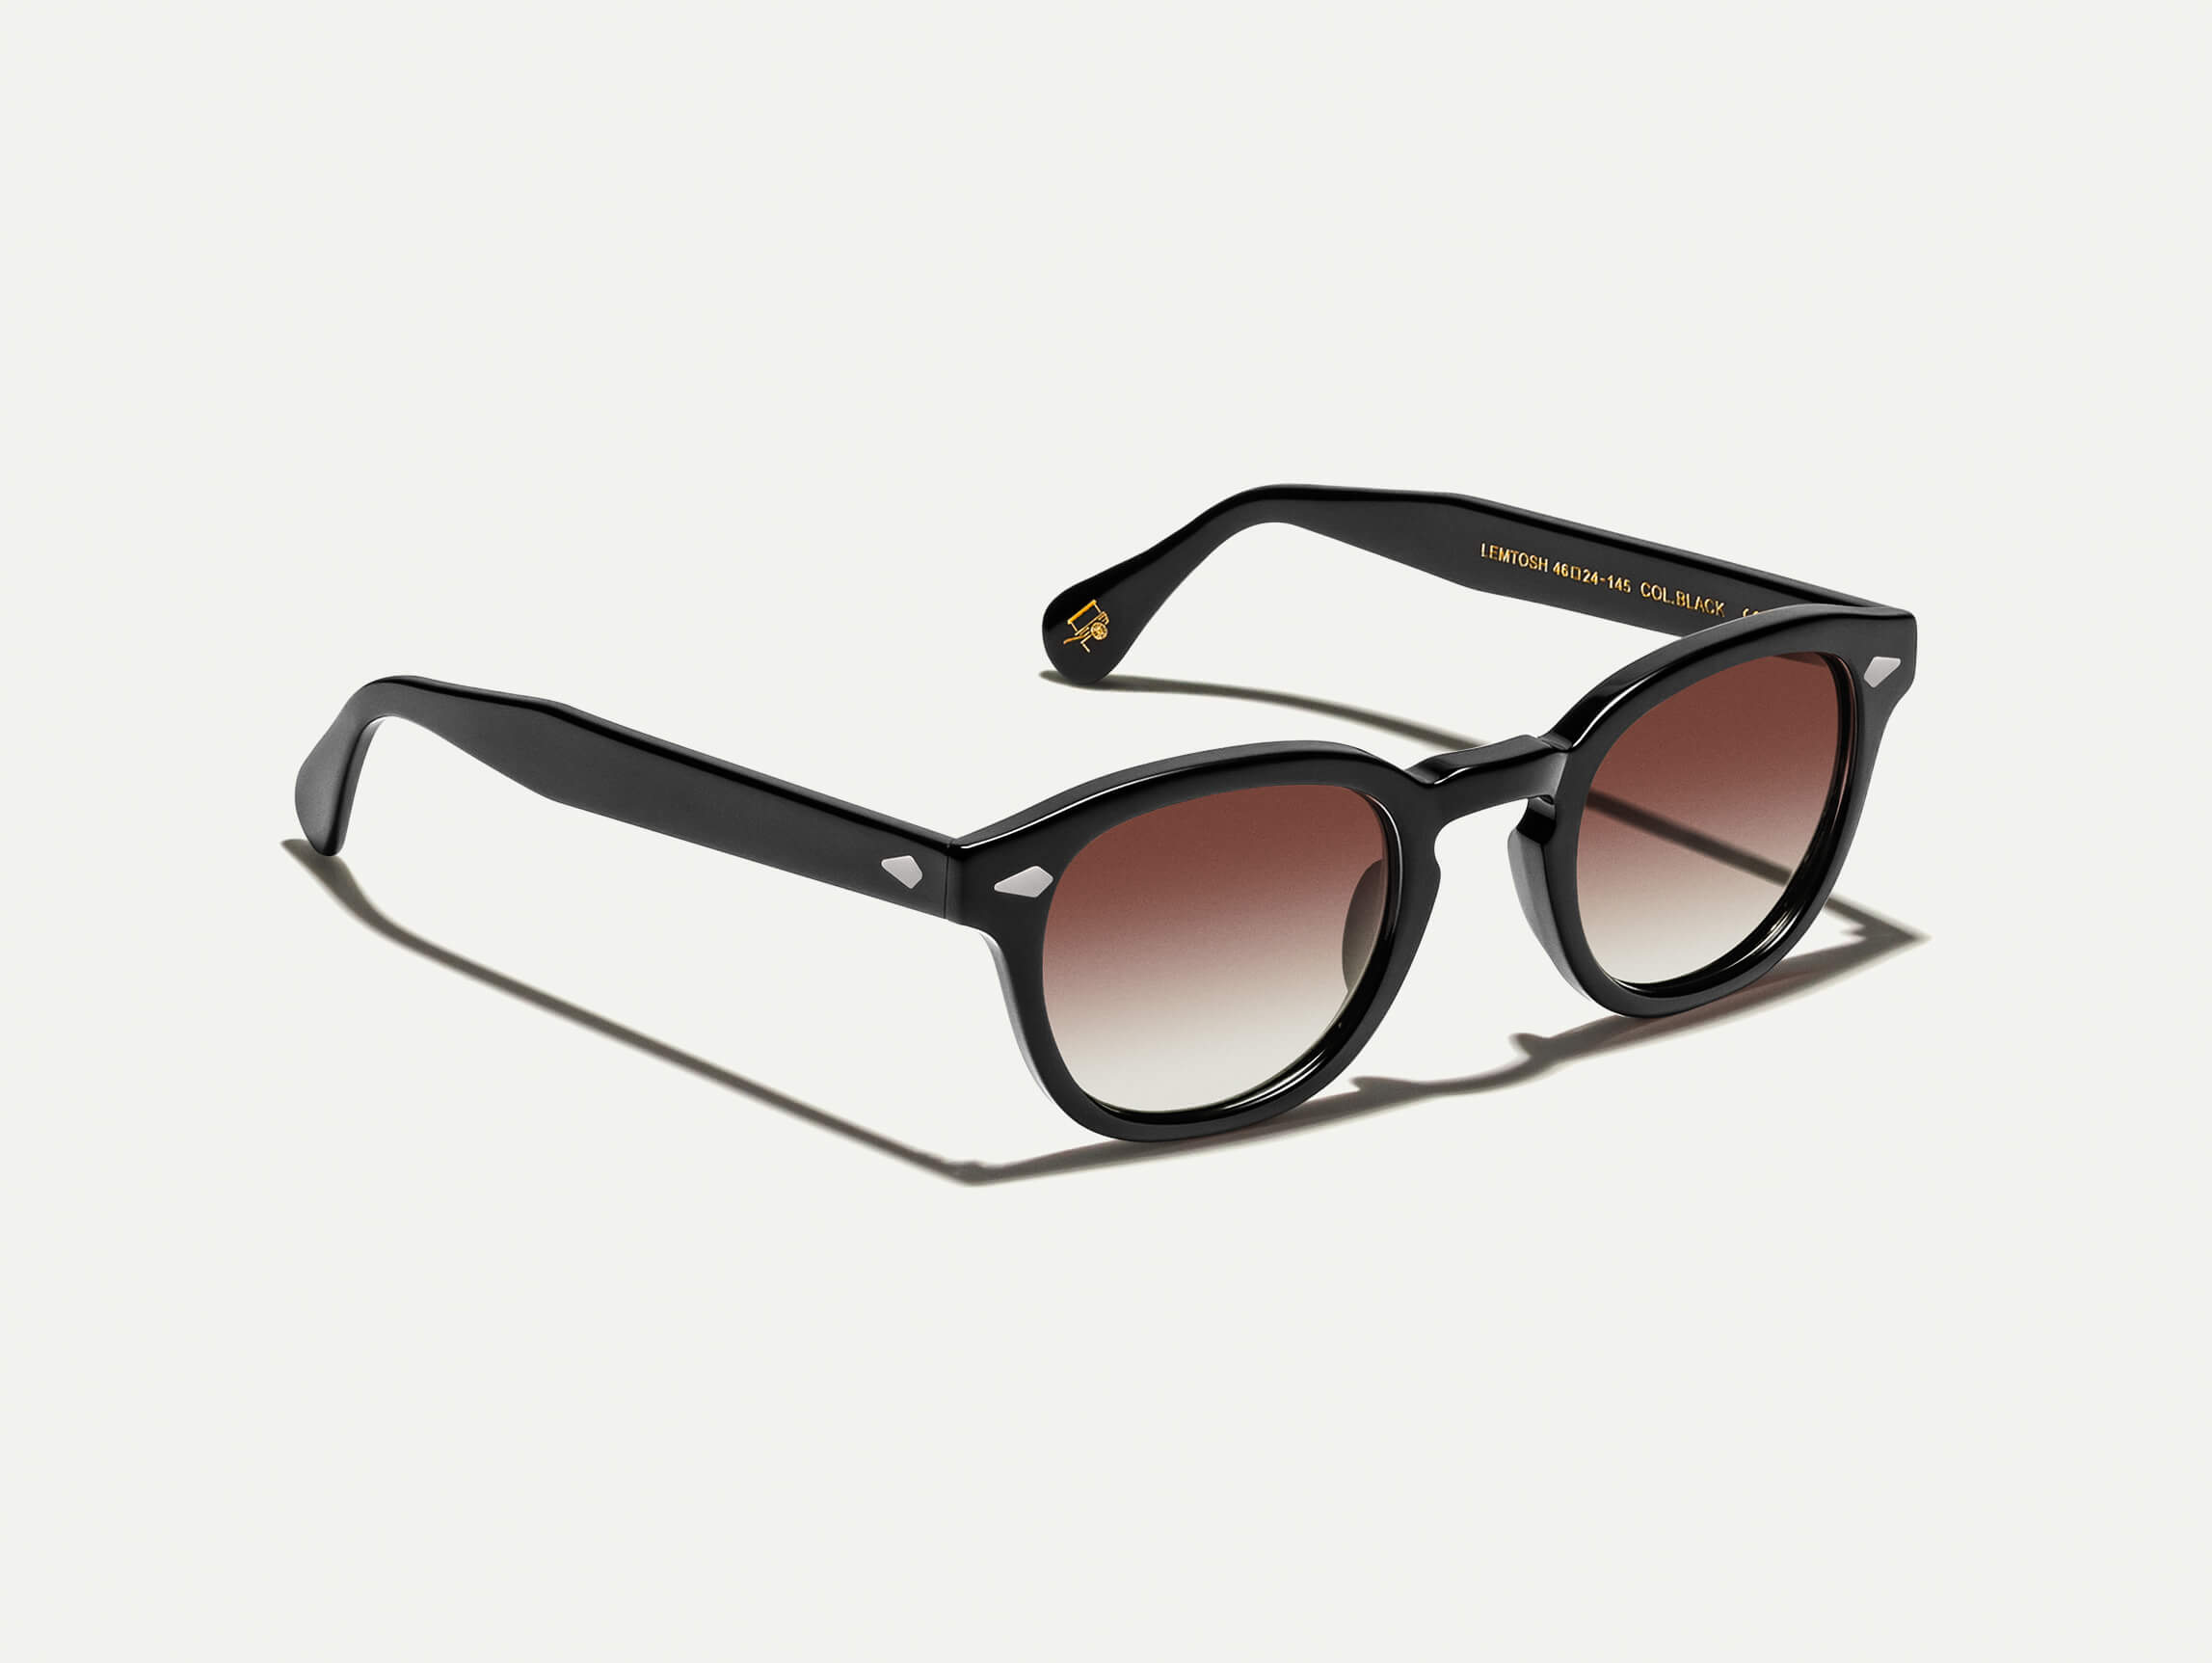 The LEMTOSH Black with Root Beer Fade Tinted Lenses